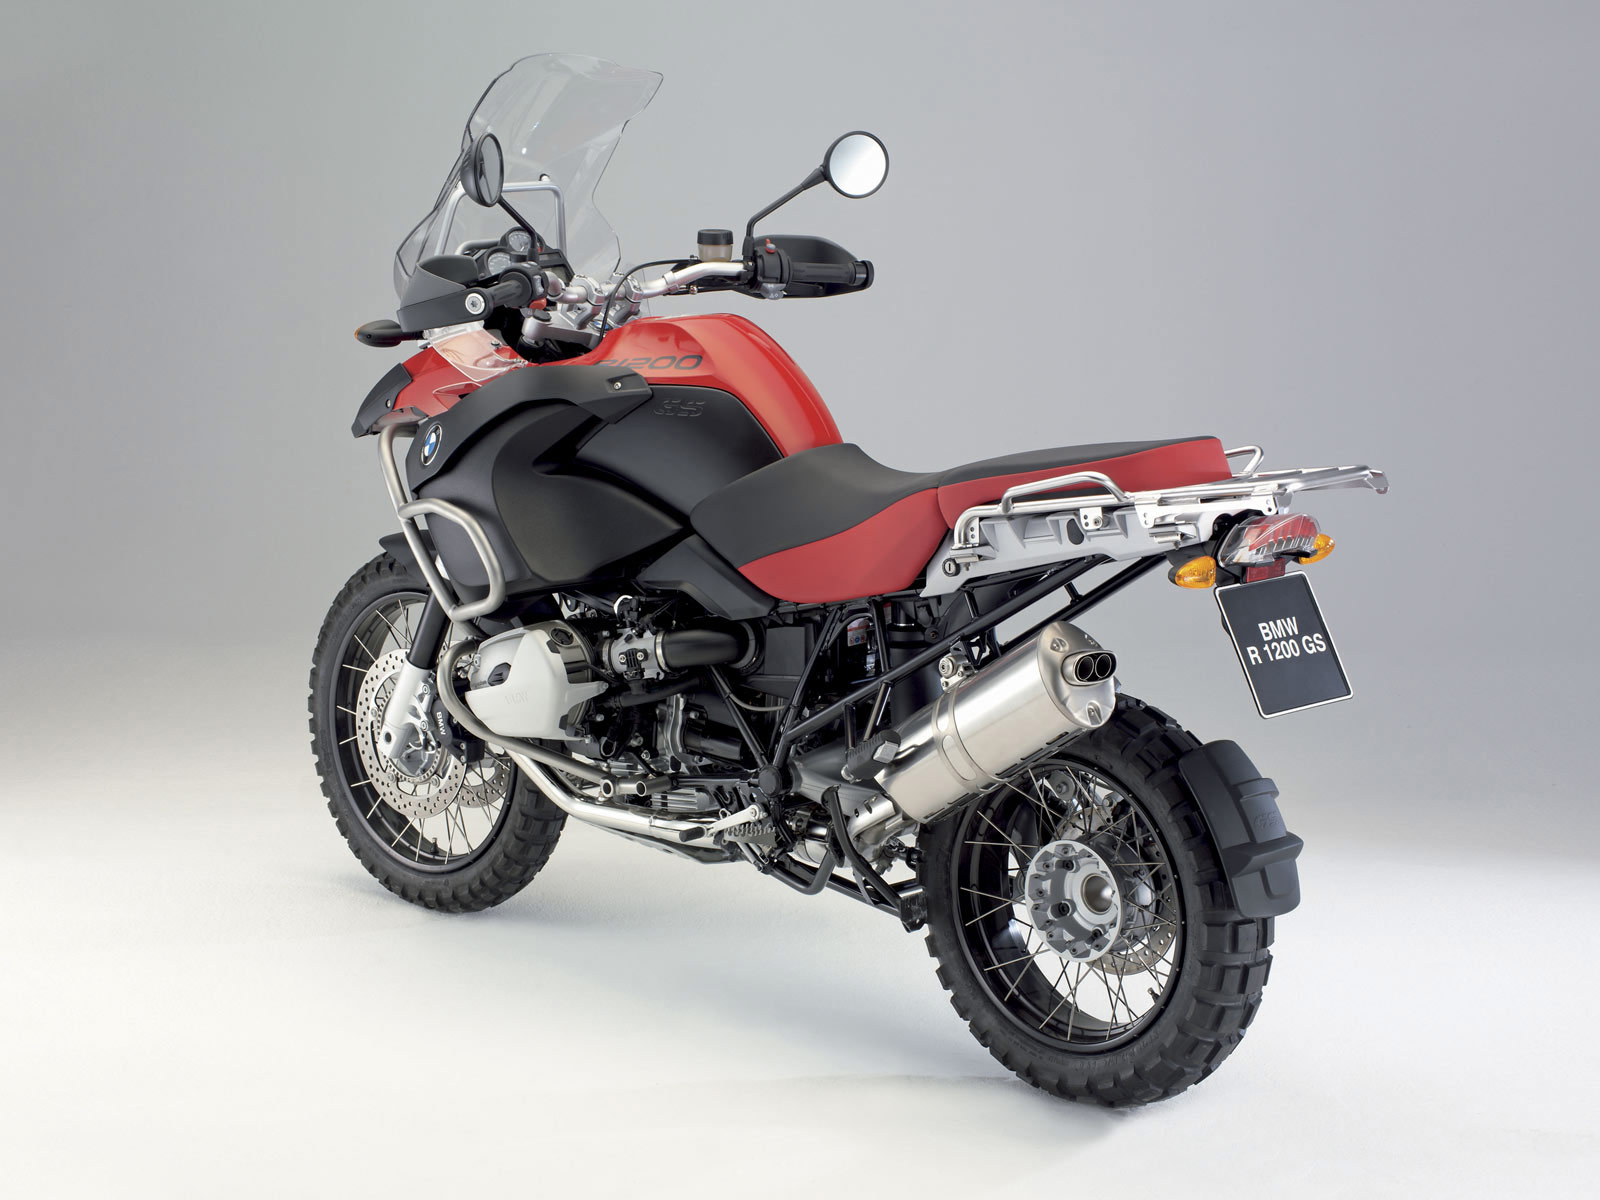 2008 BMW R1200GS Adventures motorcycle pictures